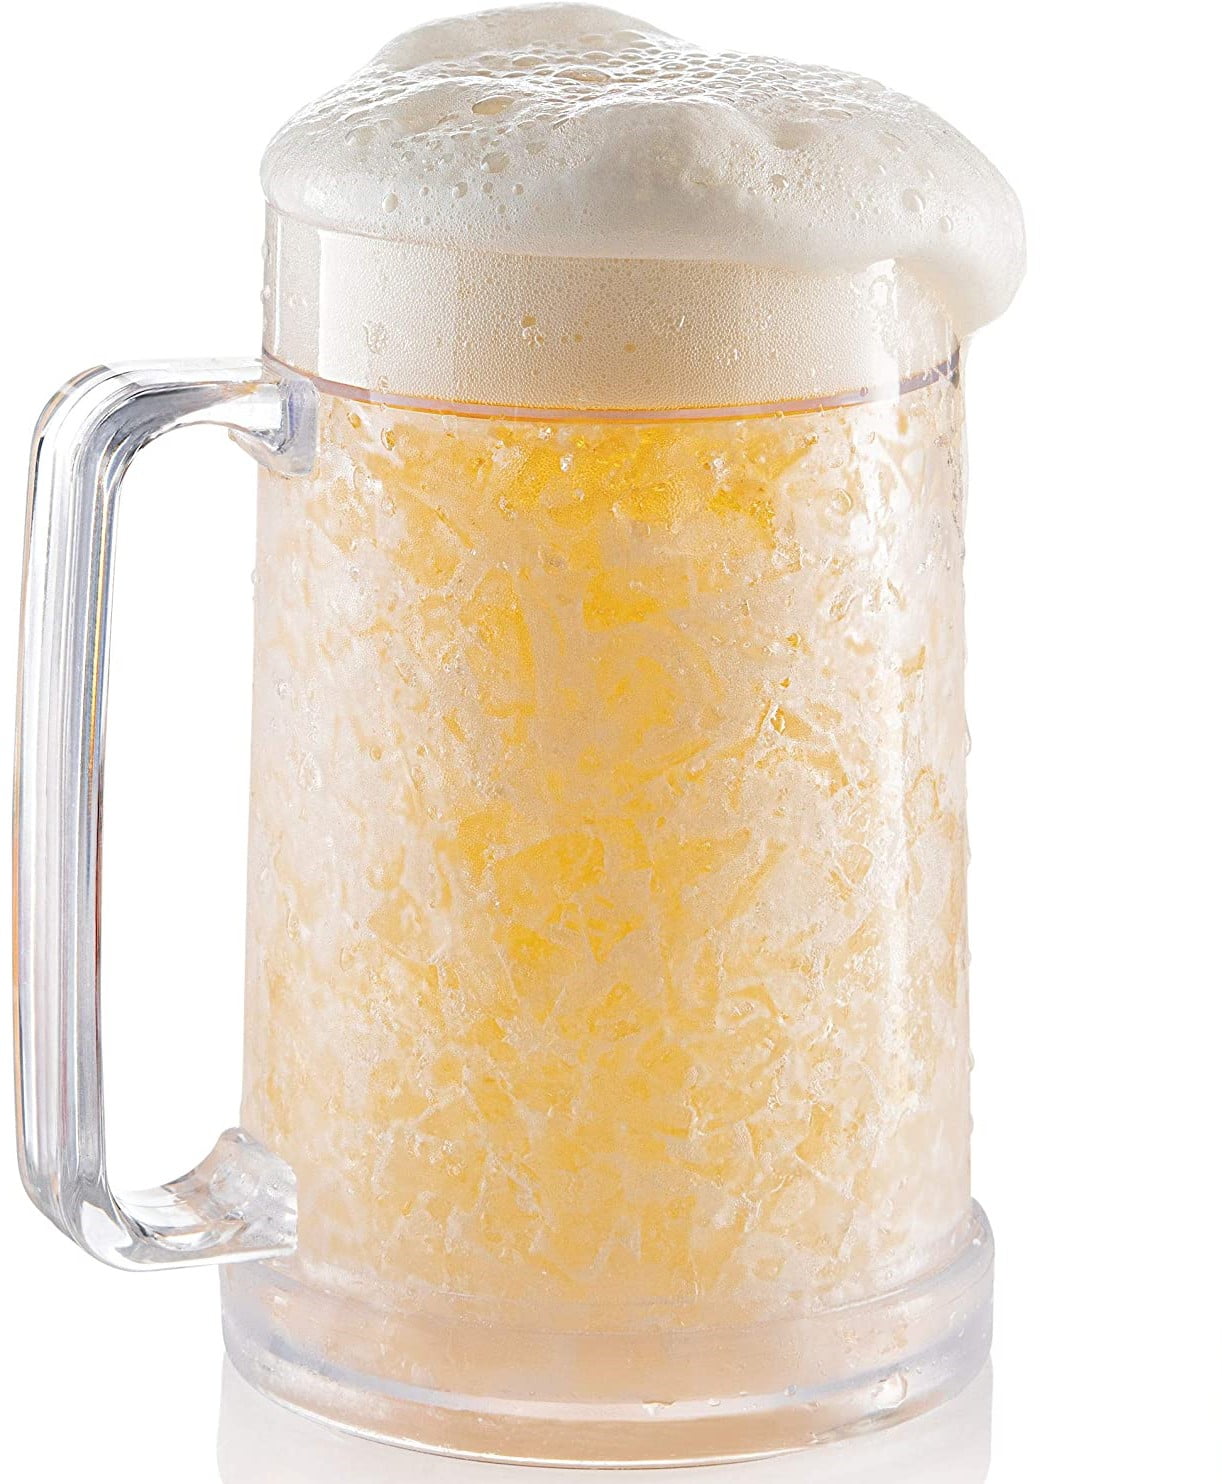 Lily's Home Freezer Beer Mugs, Double Wall, Insulated with Liquid Gel  Plastic Freezable Glasses, 16 …See more Lily's Home Freezer Beer Mugs,  Double